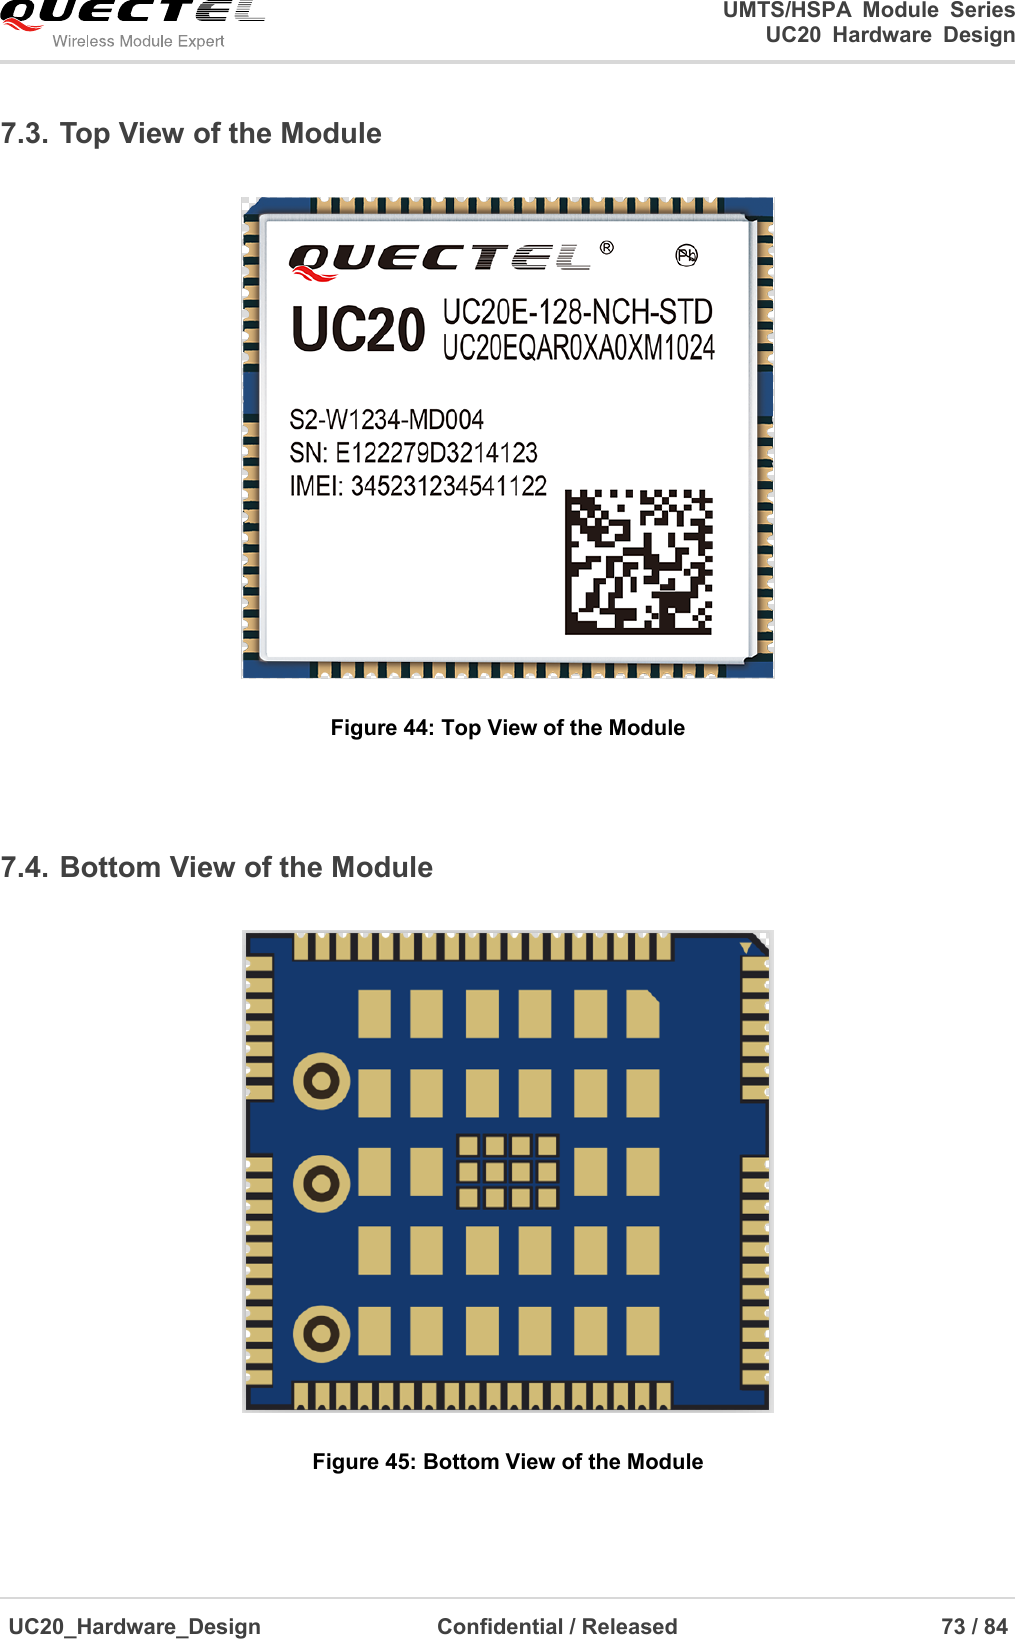                                                                                                                                               UMTS/HSPA  Module  Series                                                                 UC20  Hardware  Design  UC20_Hardware_Design                  Confidential / Released                            73 / 84     7.3. Top View of the Module  Figure 44: Top View of the Module  7.4. Bottom View of the Module  Figure 45: Bottom View of the Module 